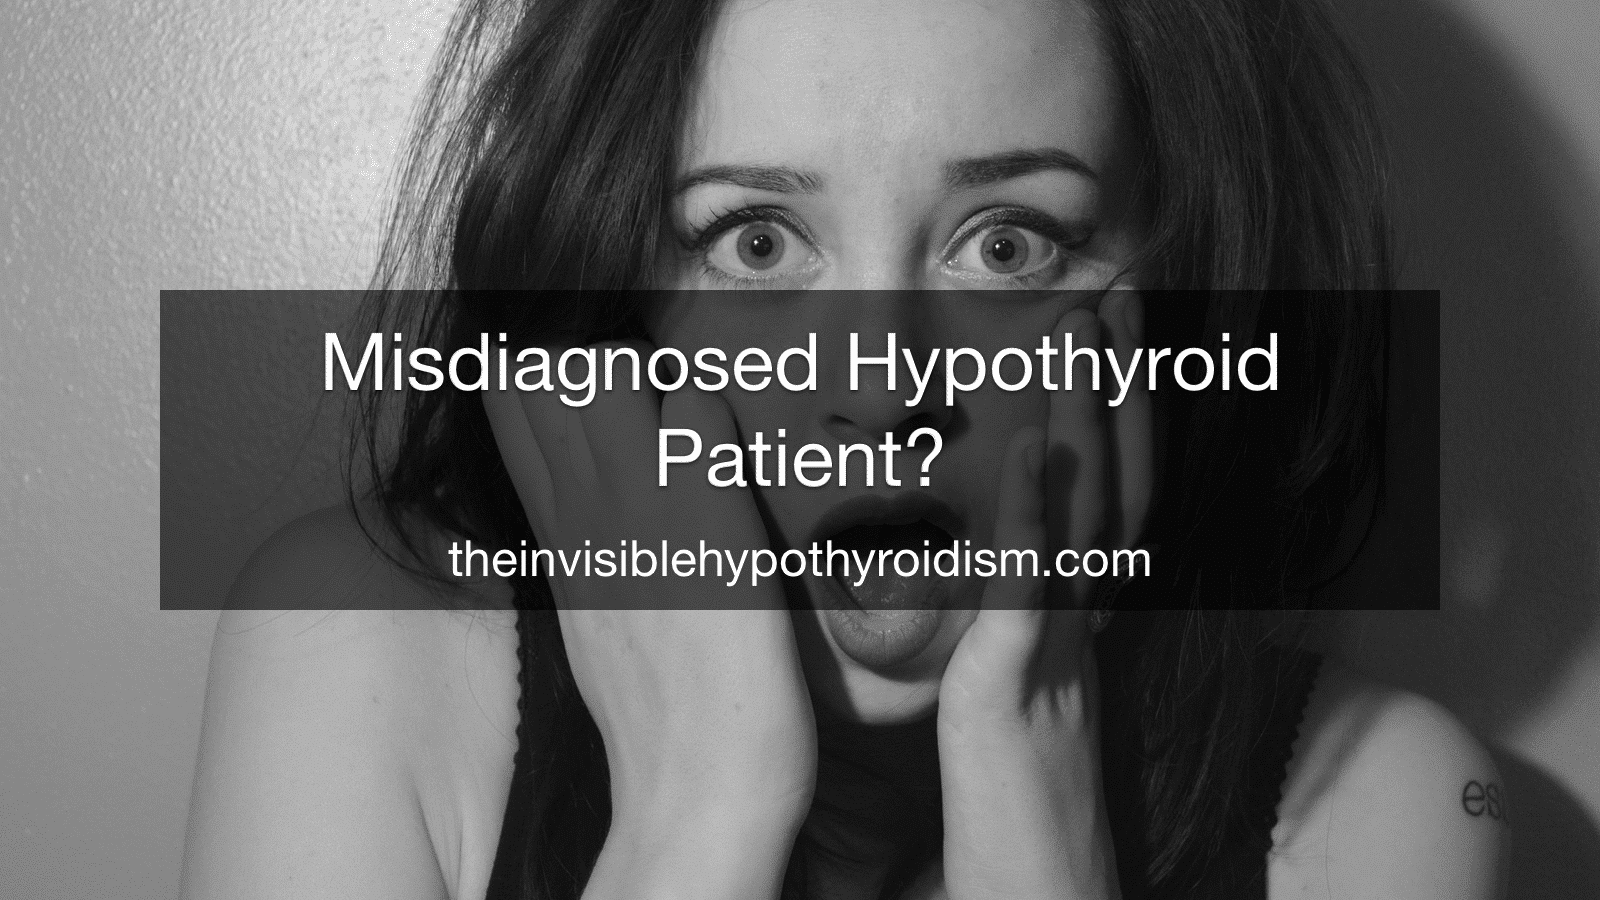 Misdiagnosed Hypothyroid Patient?